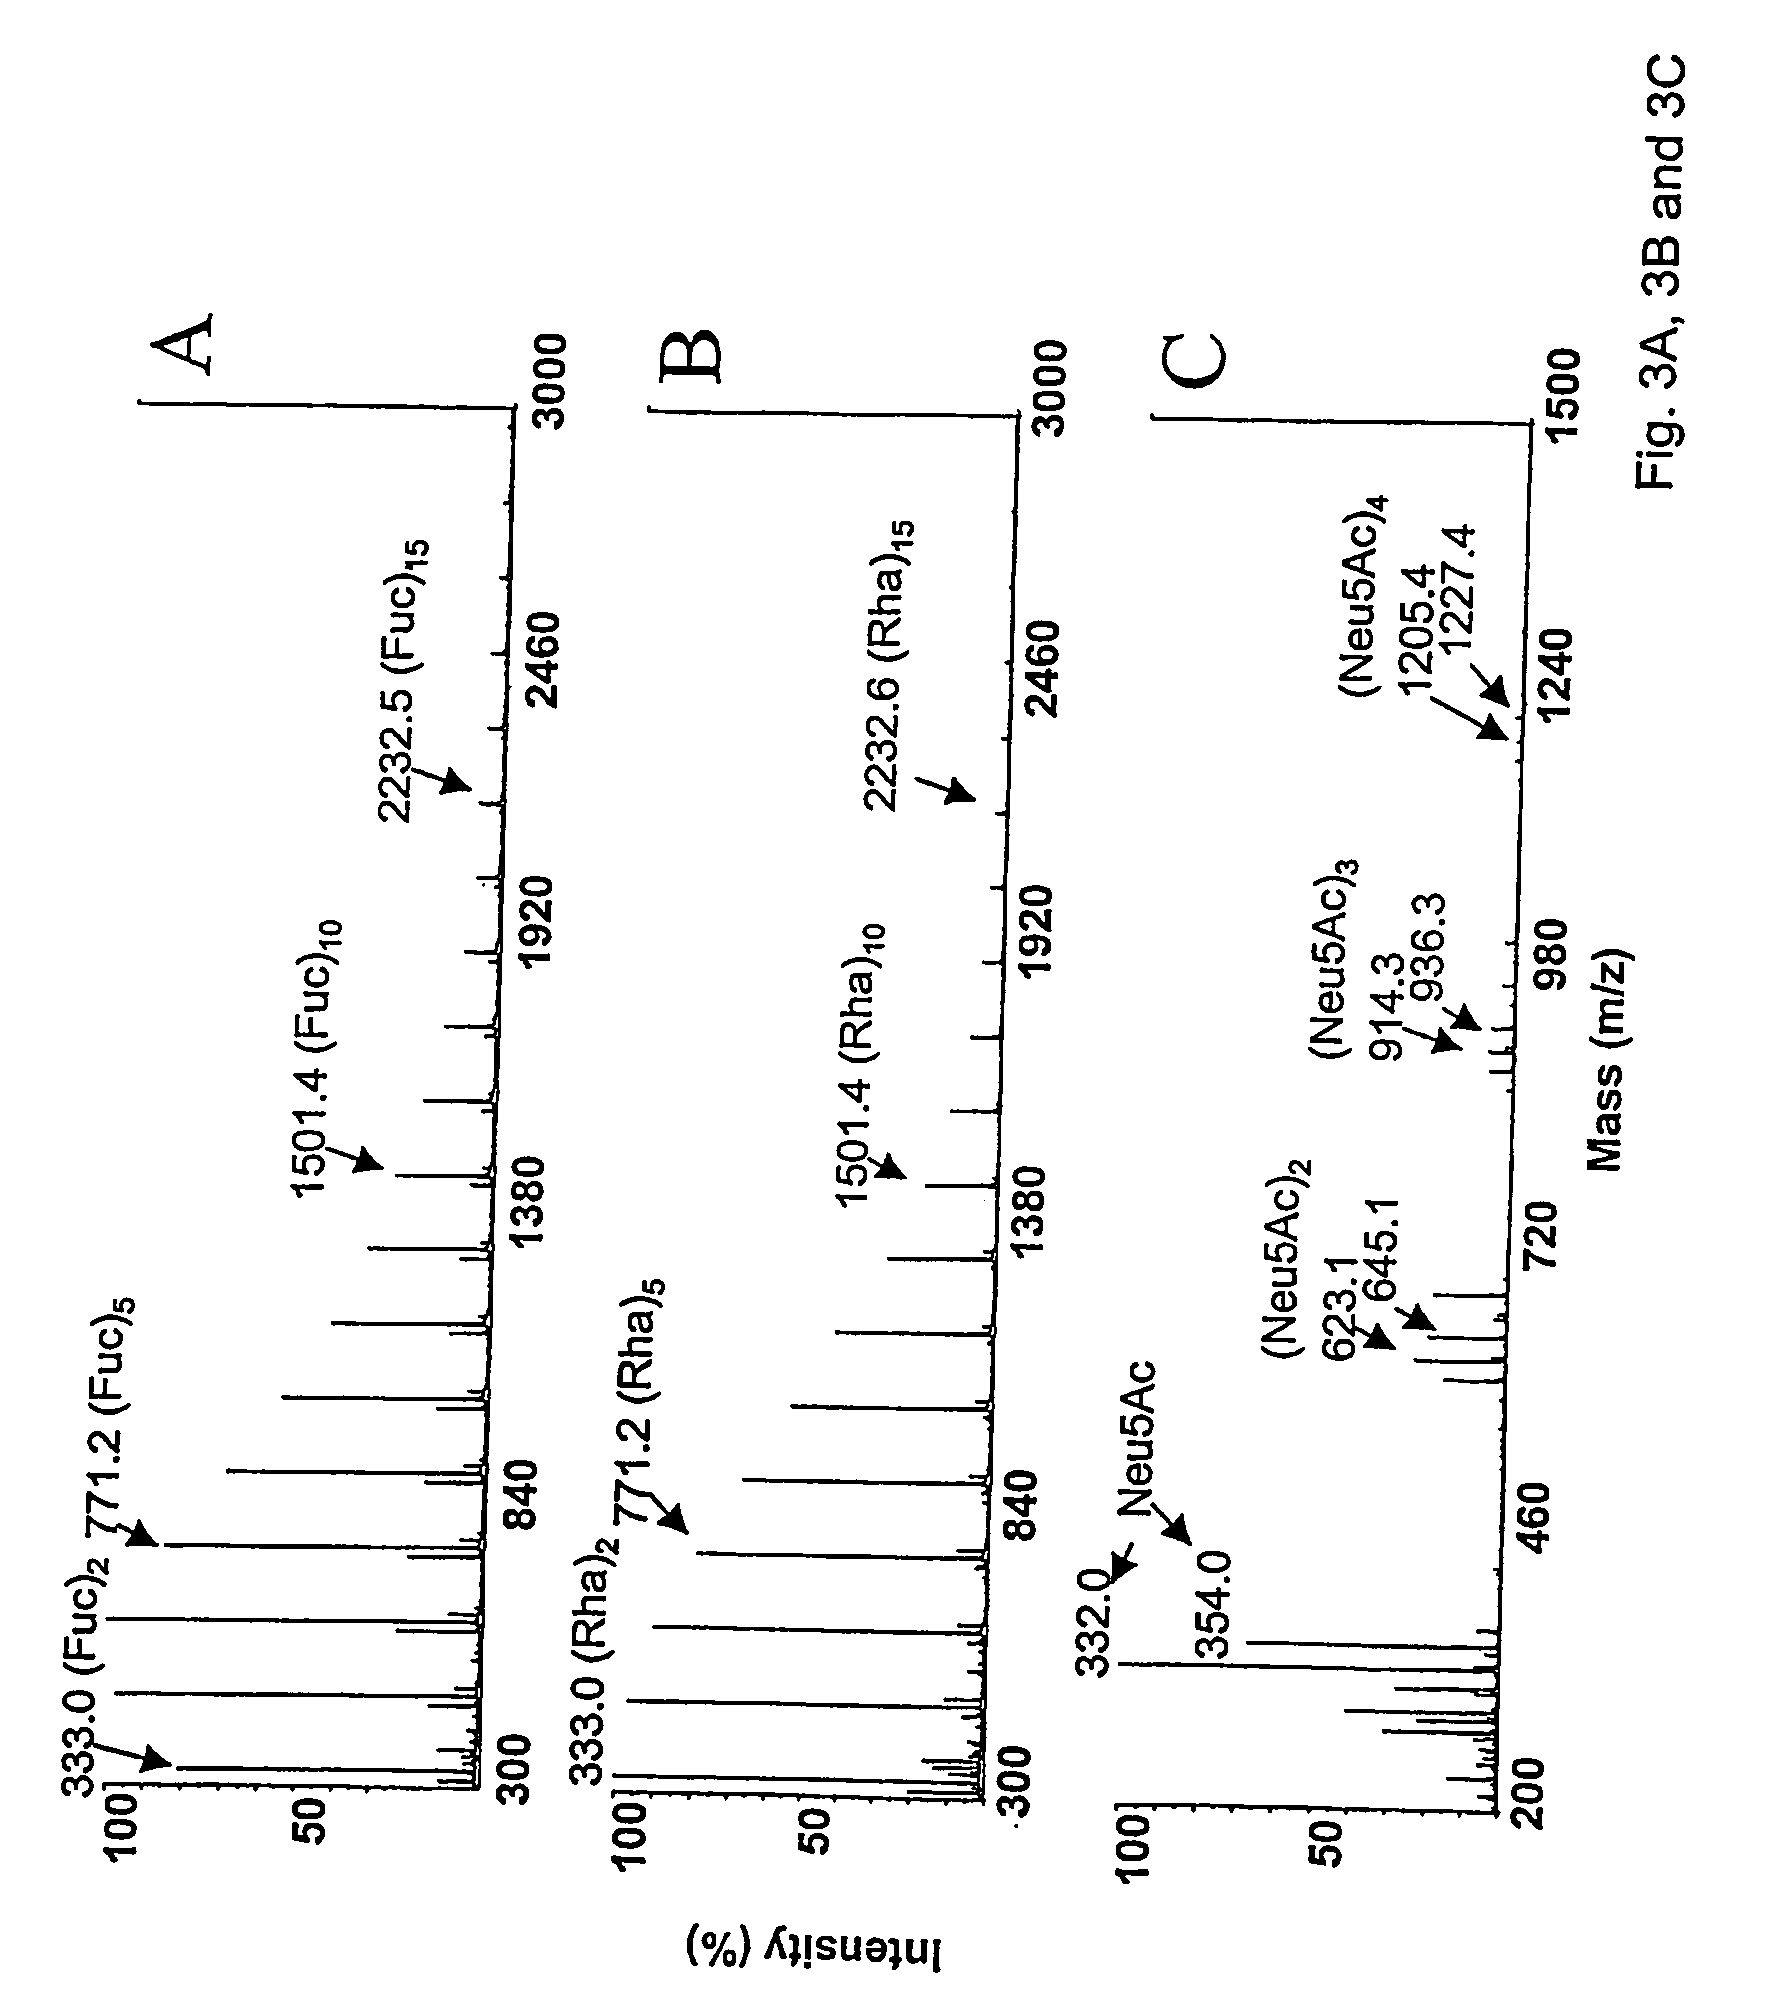 Novel carbohydrate compositions and a process of preparing same